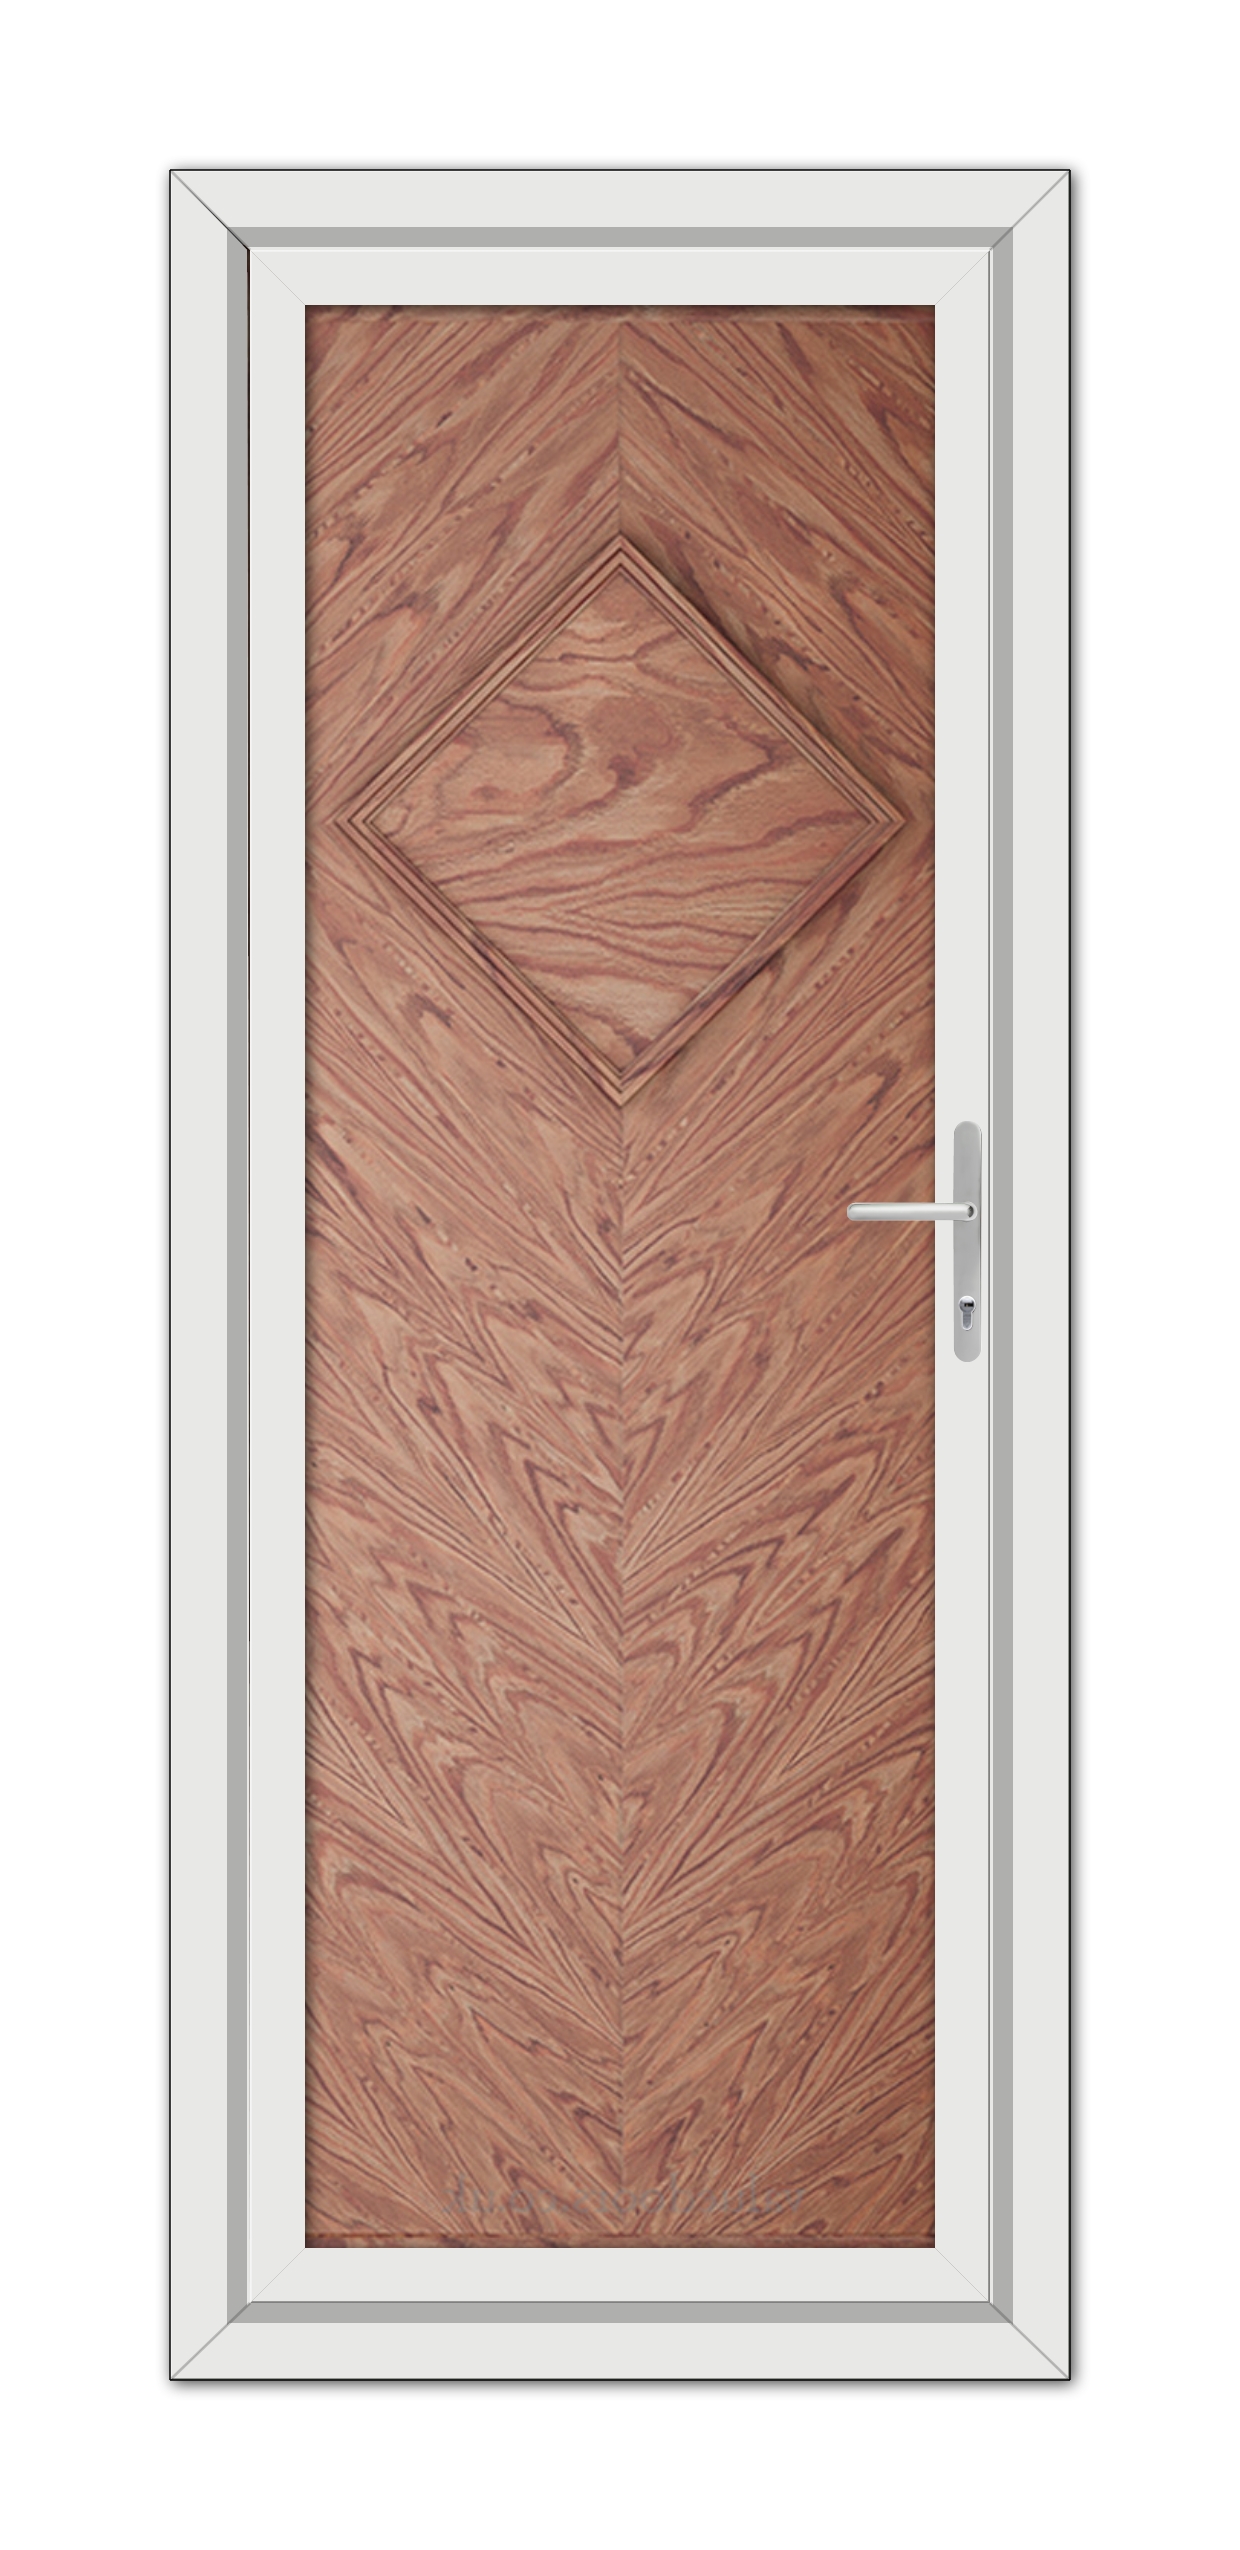 A modern Solid Oak Hamburg door with a chevron pattern and a metal handle, framed in white.